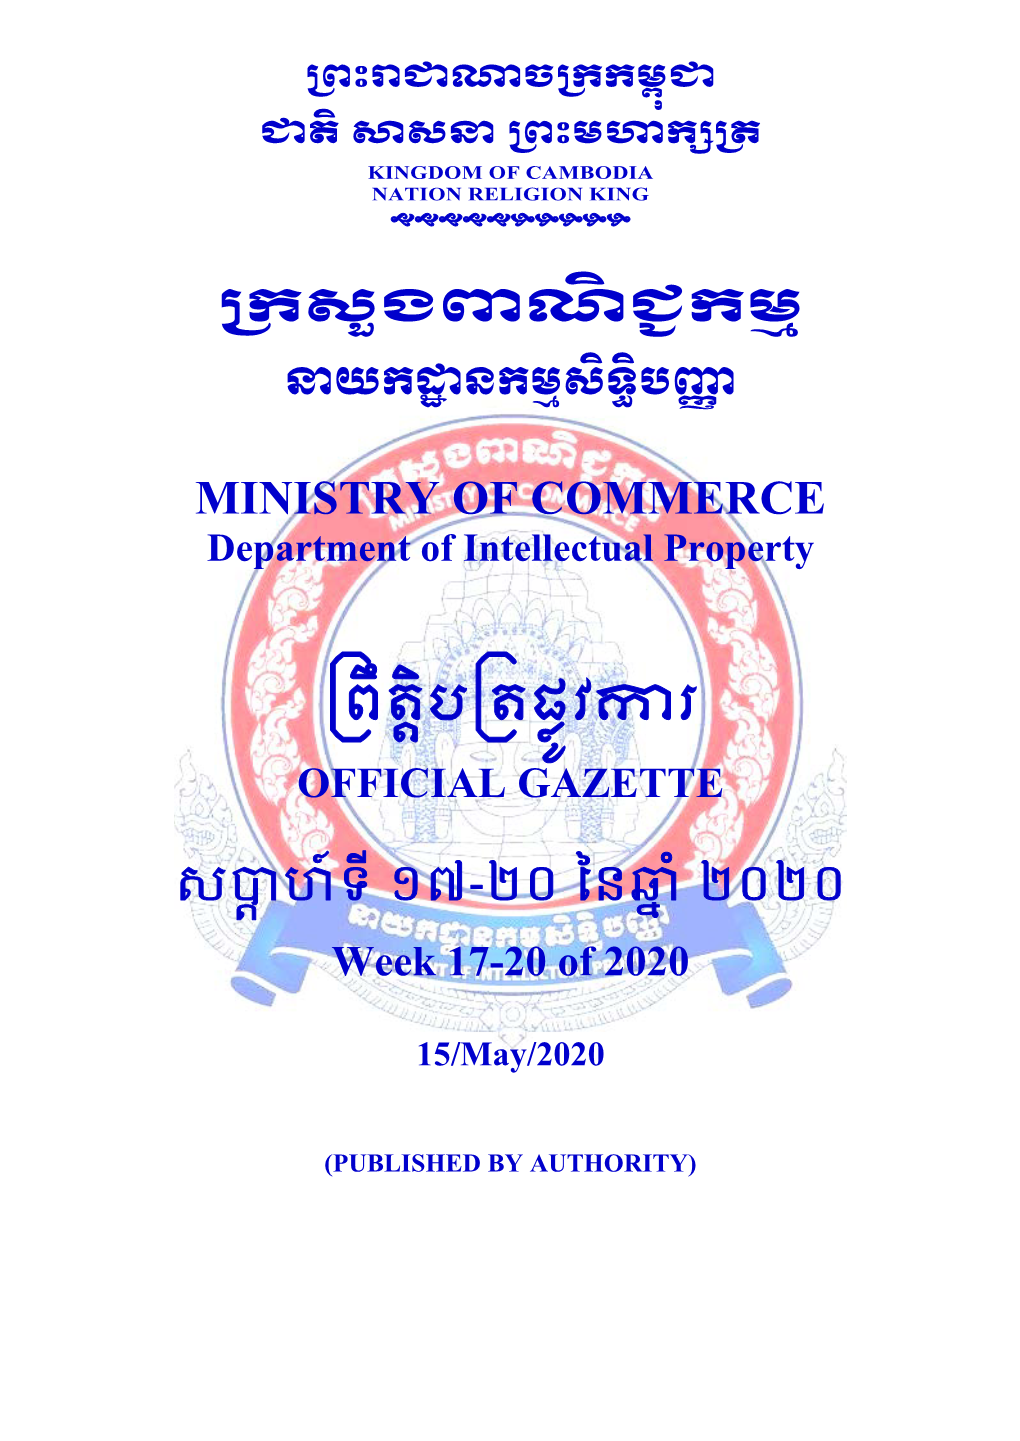 Ministry of Commerce ្រពឹត ិប្រតផ ូវក រ សបា ហ៍ទី ១៧-២០